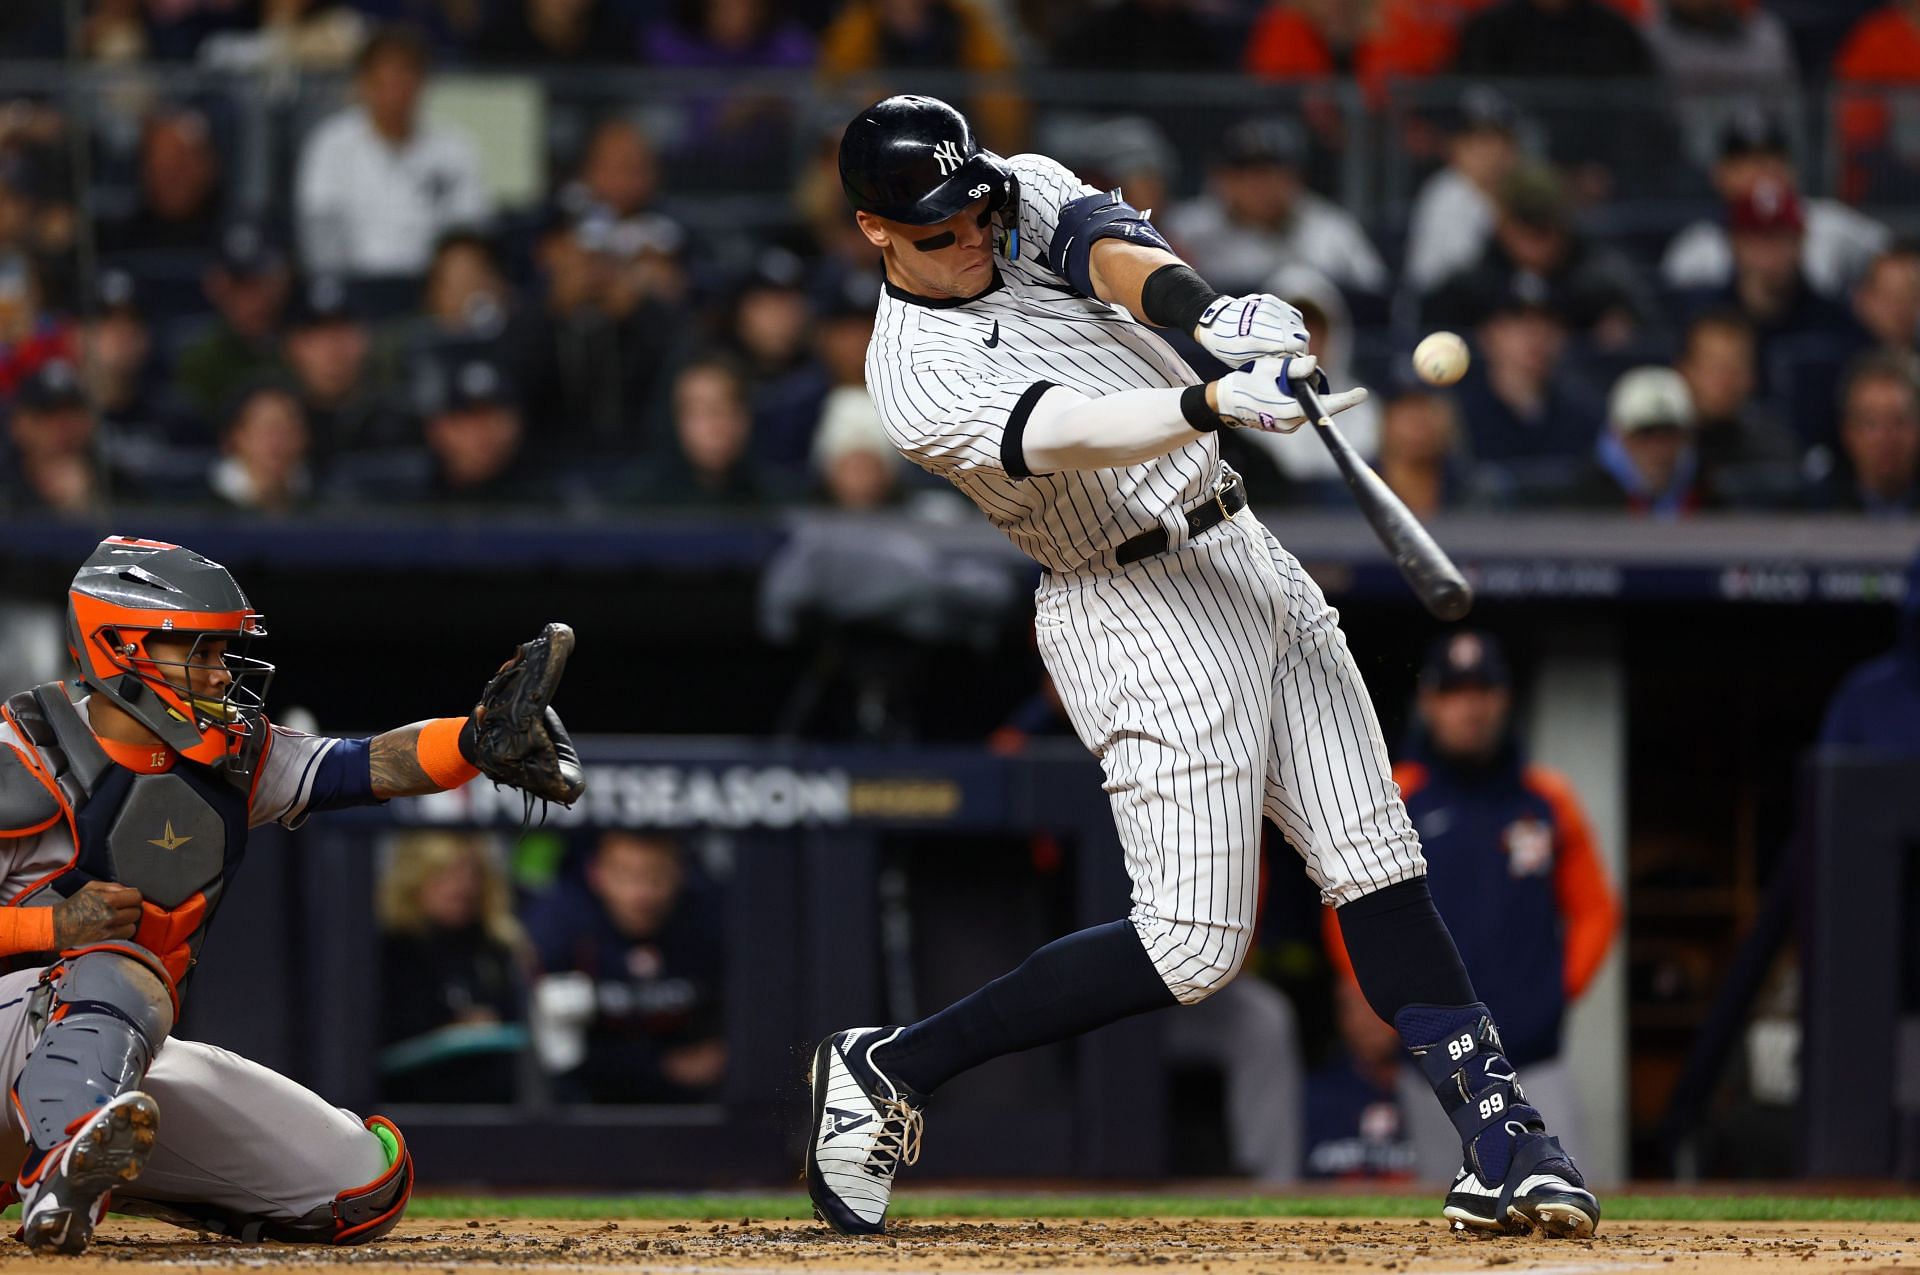 Aaron Judge of the New York Yankees against the Houston Astros at Yankee Stadium